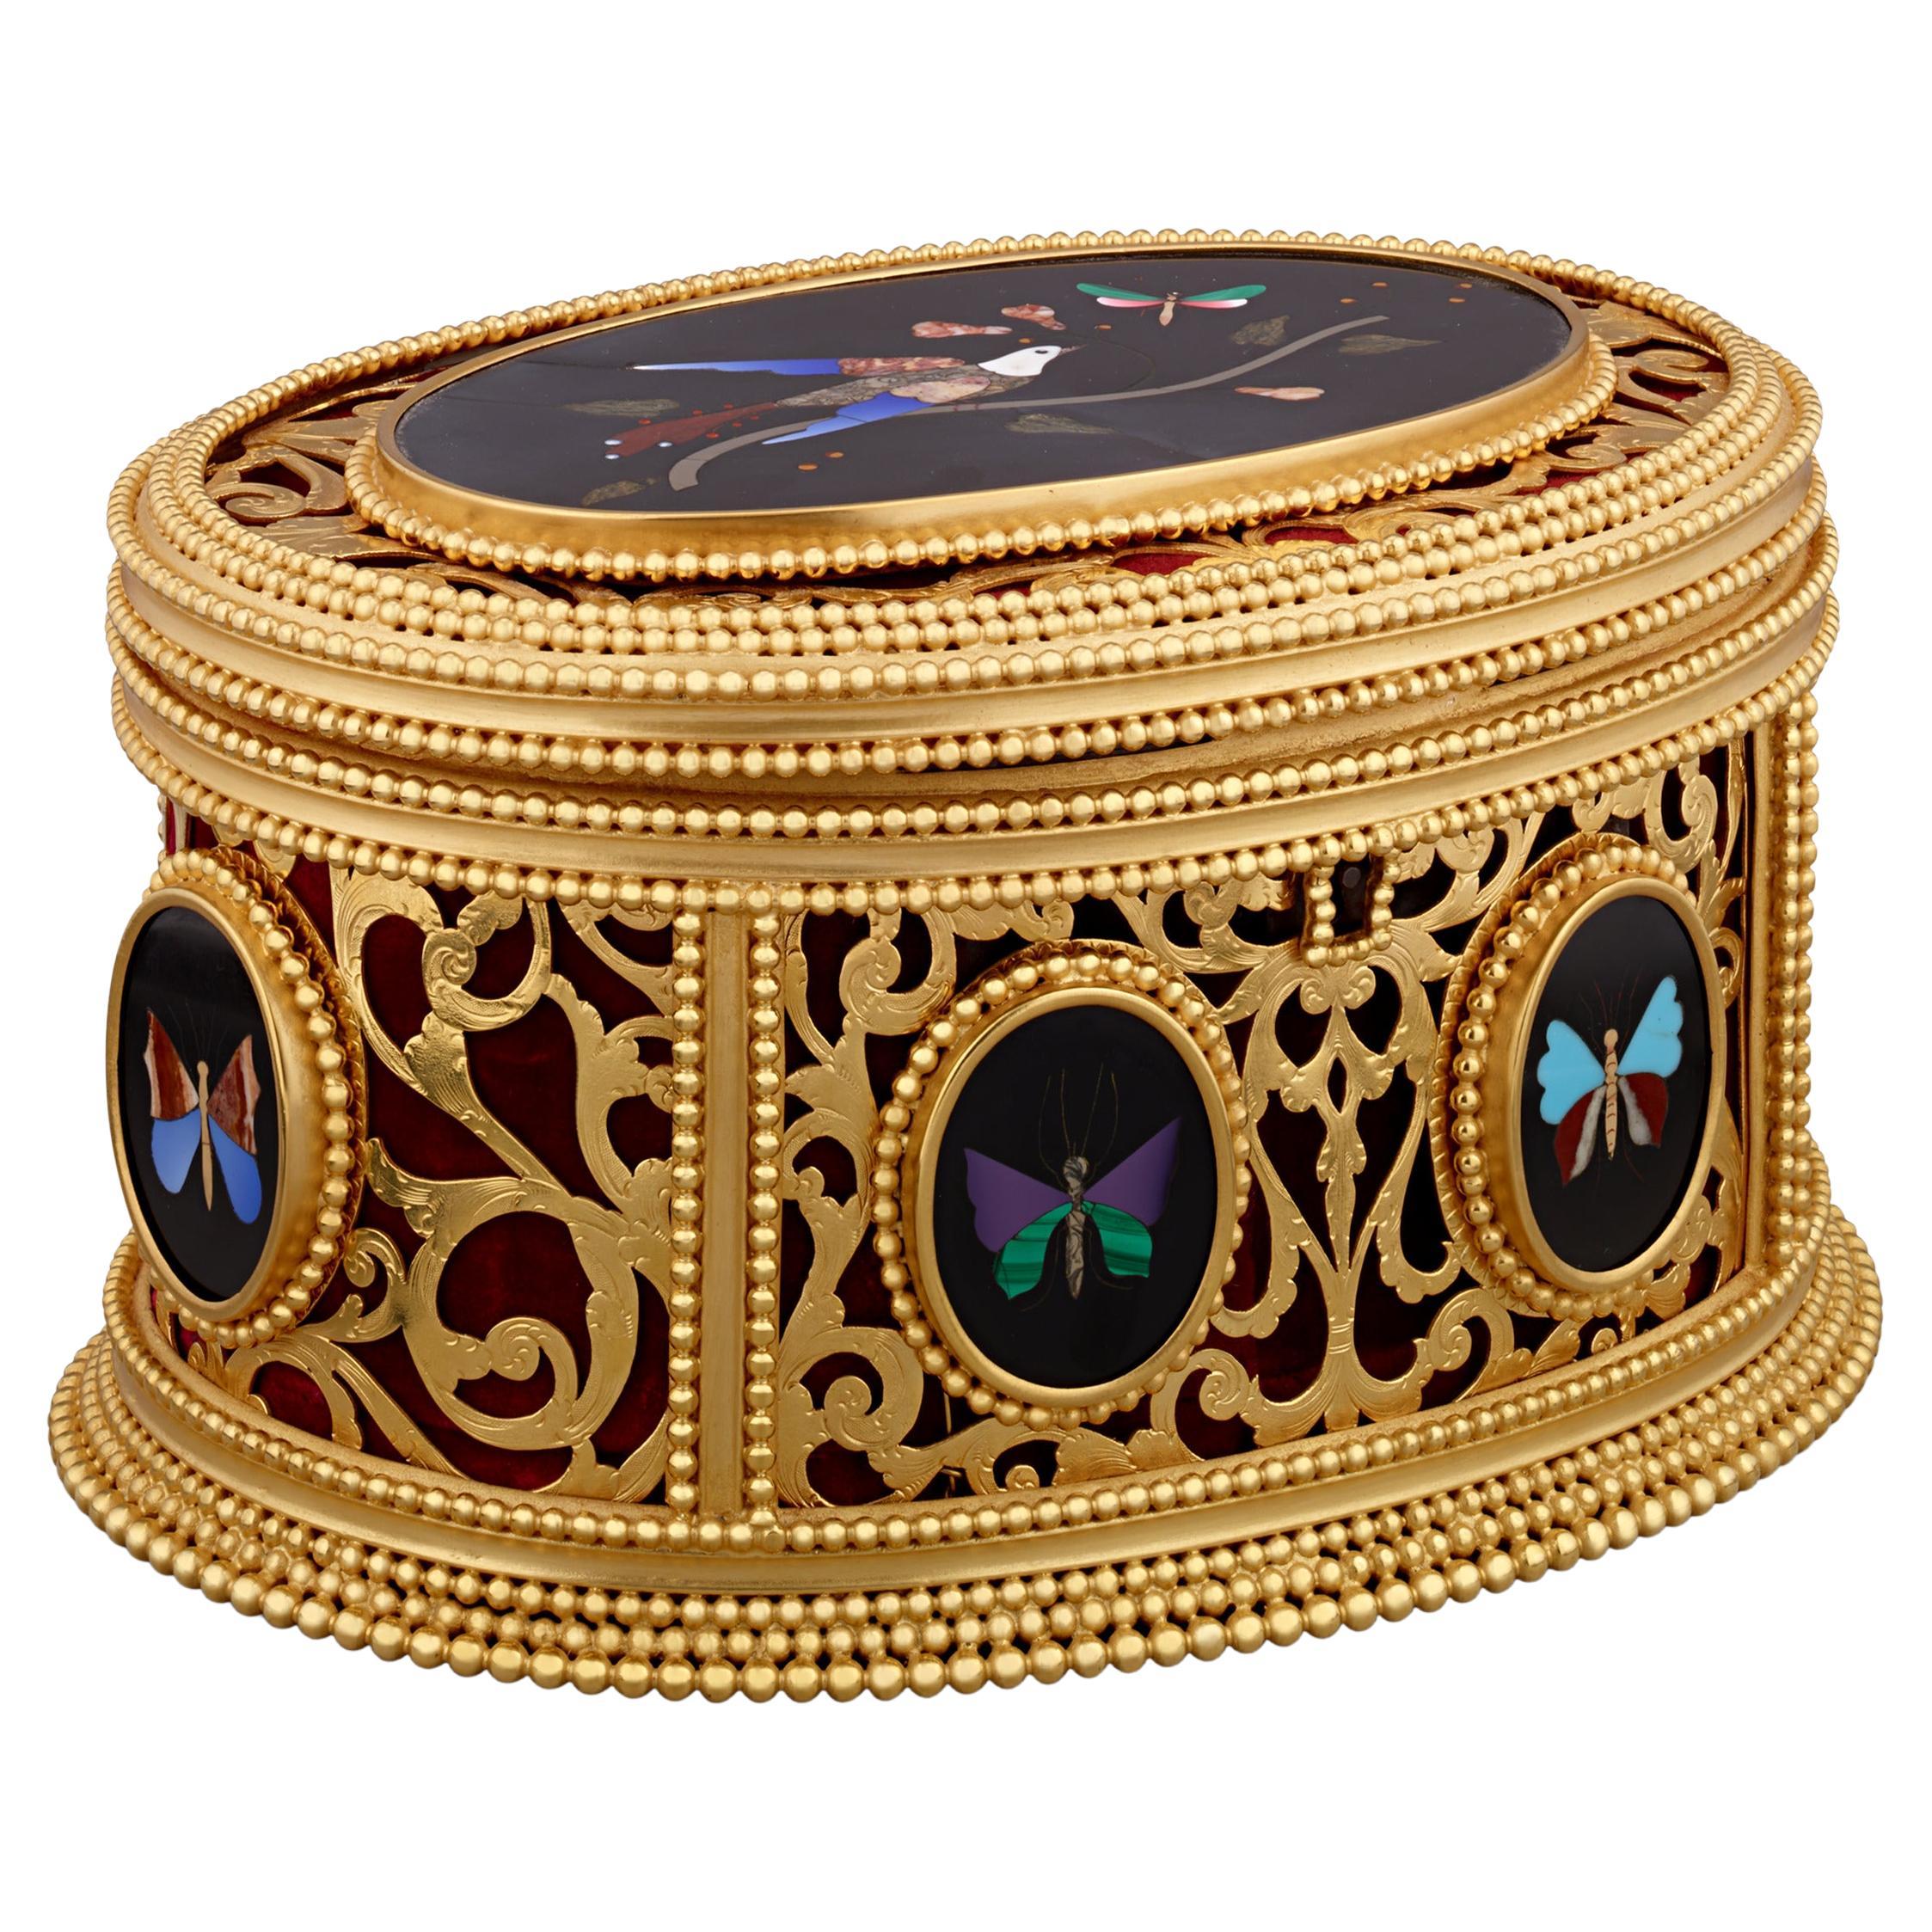 Pietre Dure And Doré Bronze Box By Tahan For Sale